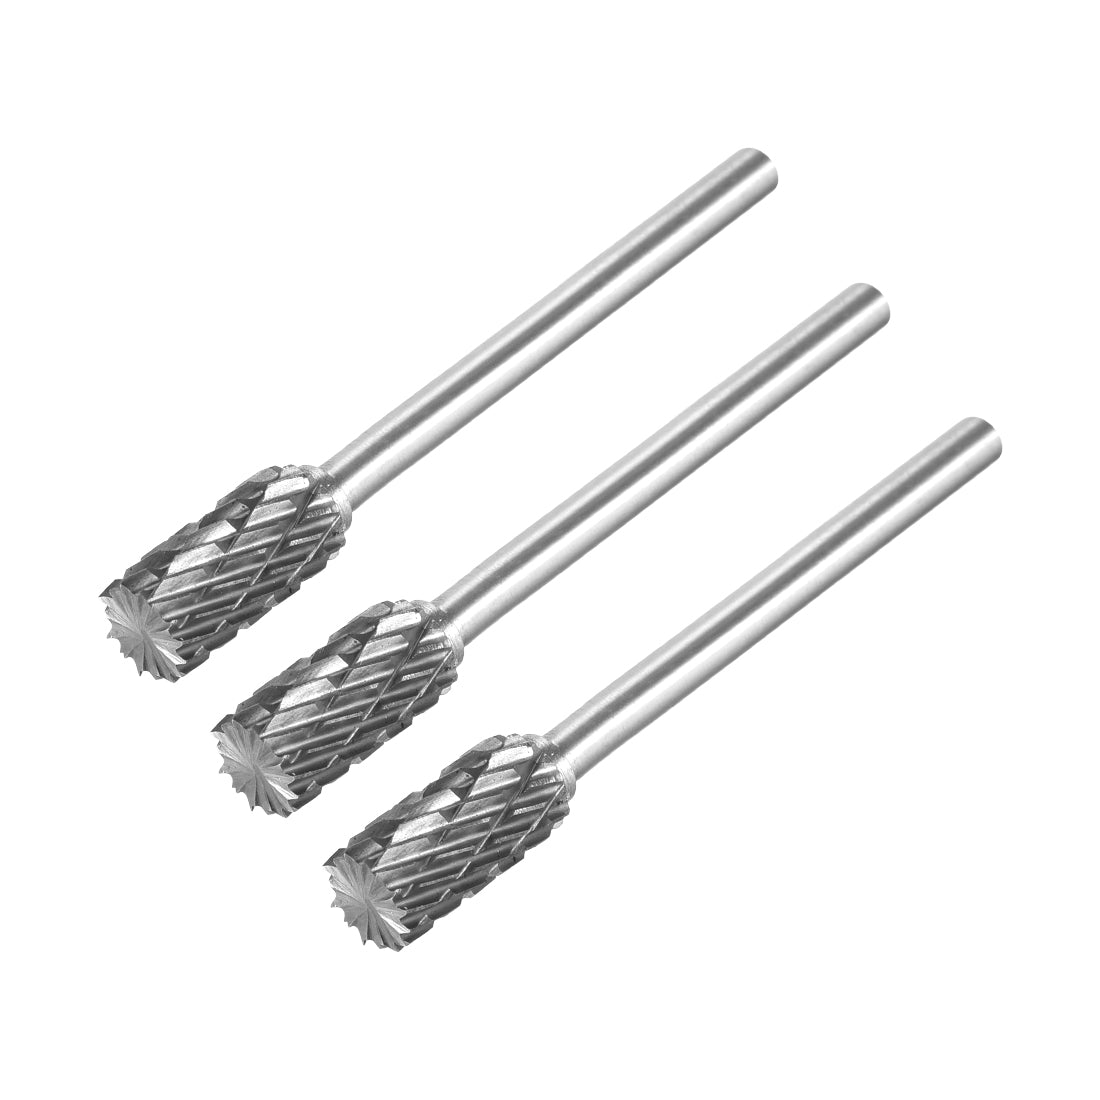 uxcell Uxcell Rotary Burrs File Double Cut Cylinder Shape w 1/8" Shank and 1/4" Head Size 3pcs